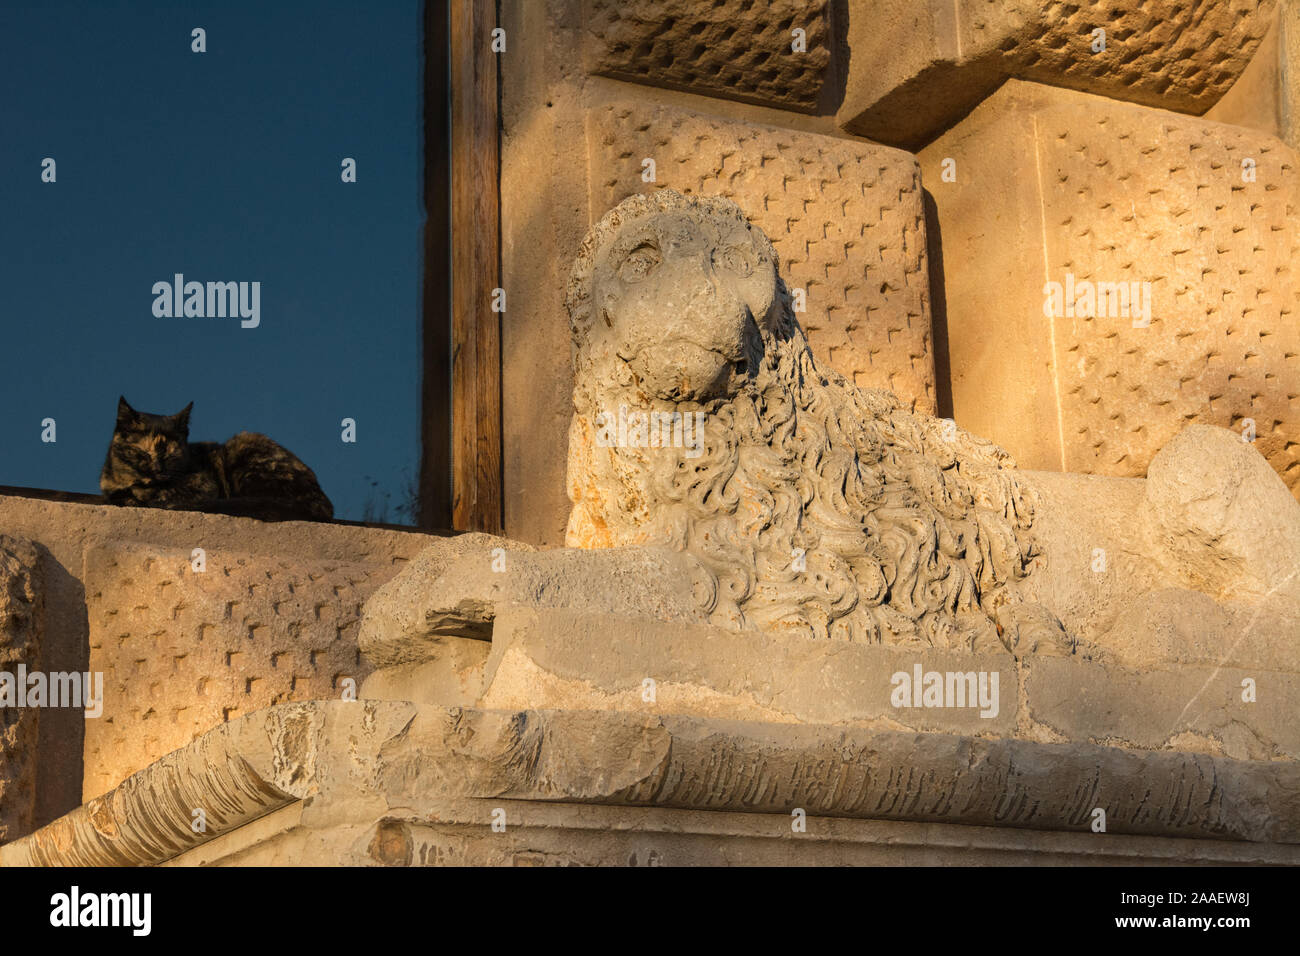 A feral cat plays copycat by sitting next to a lion sculpture in an identical pose at the Palace of Charles V in the Alhambra, Granada. Stock Photo